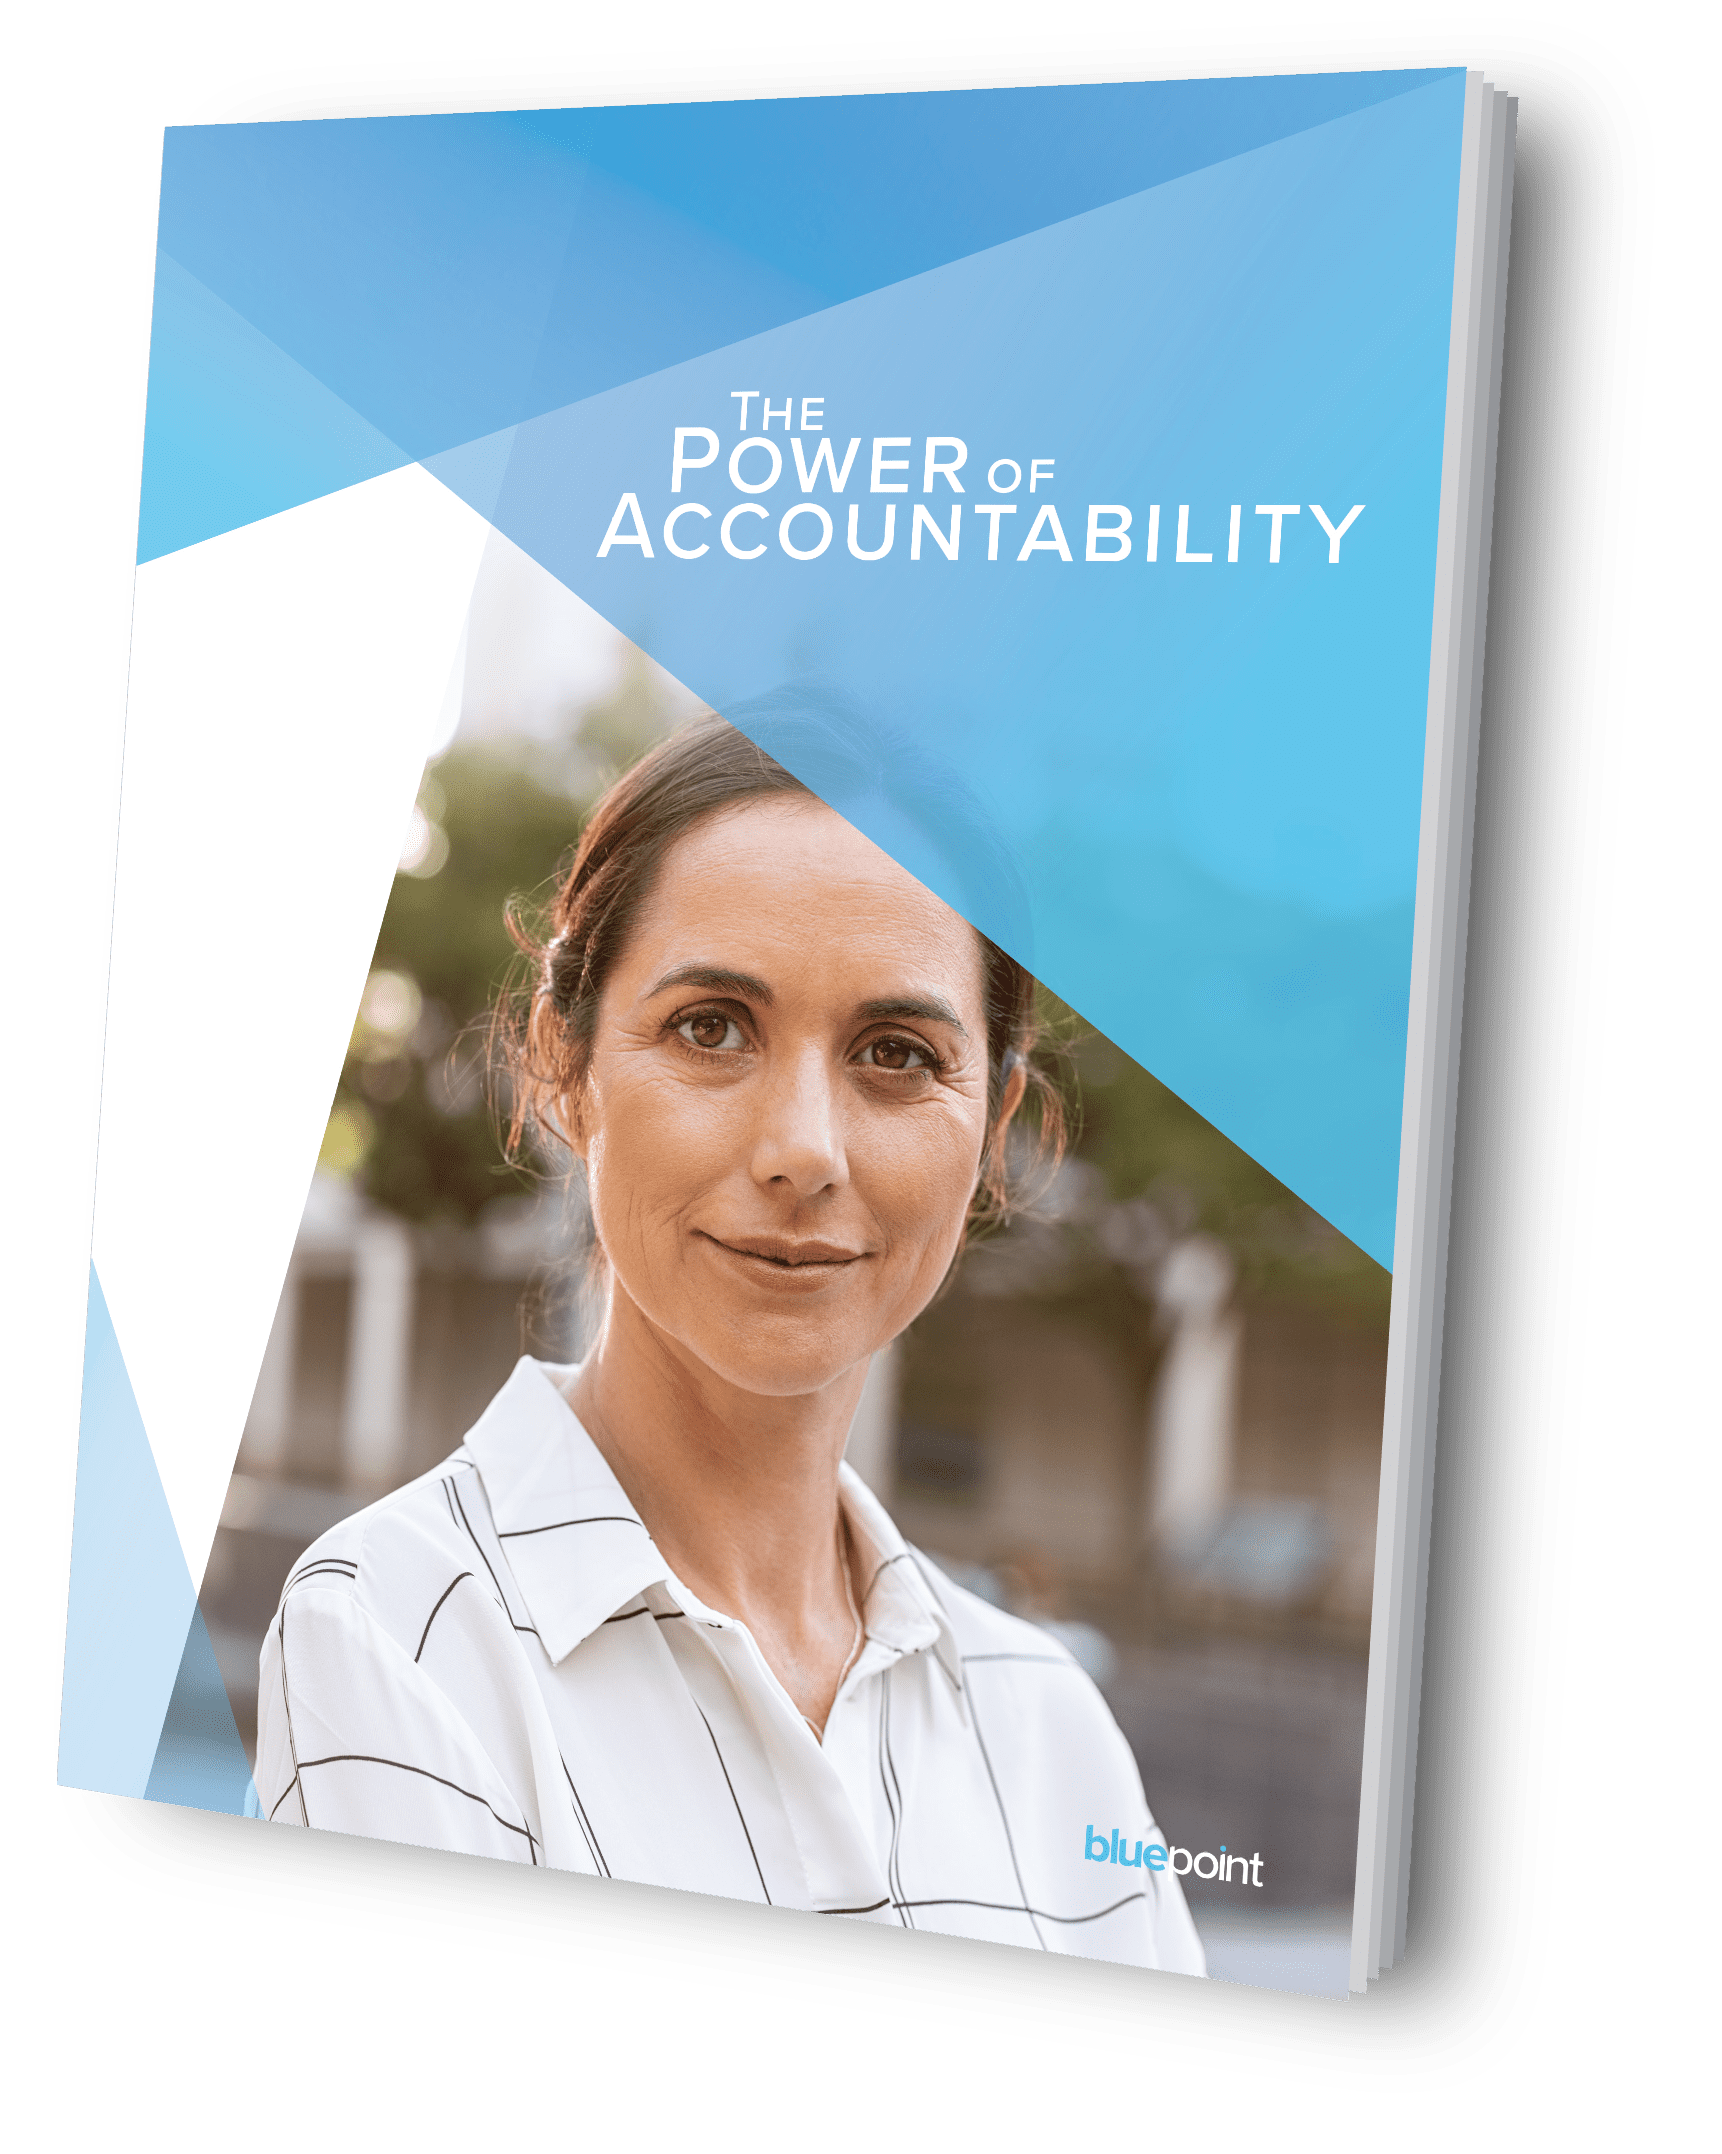 The Power of Accountability